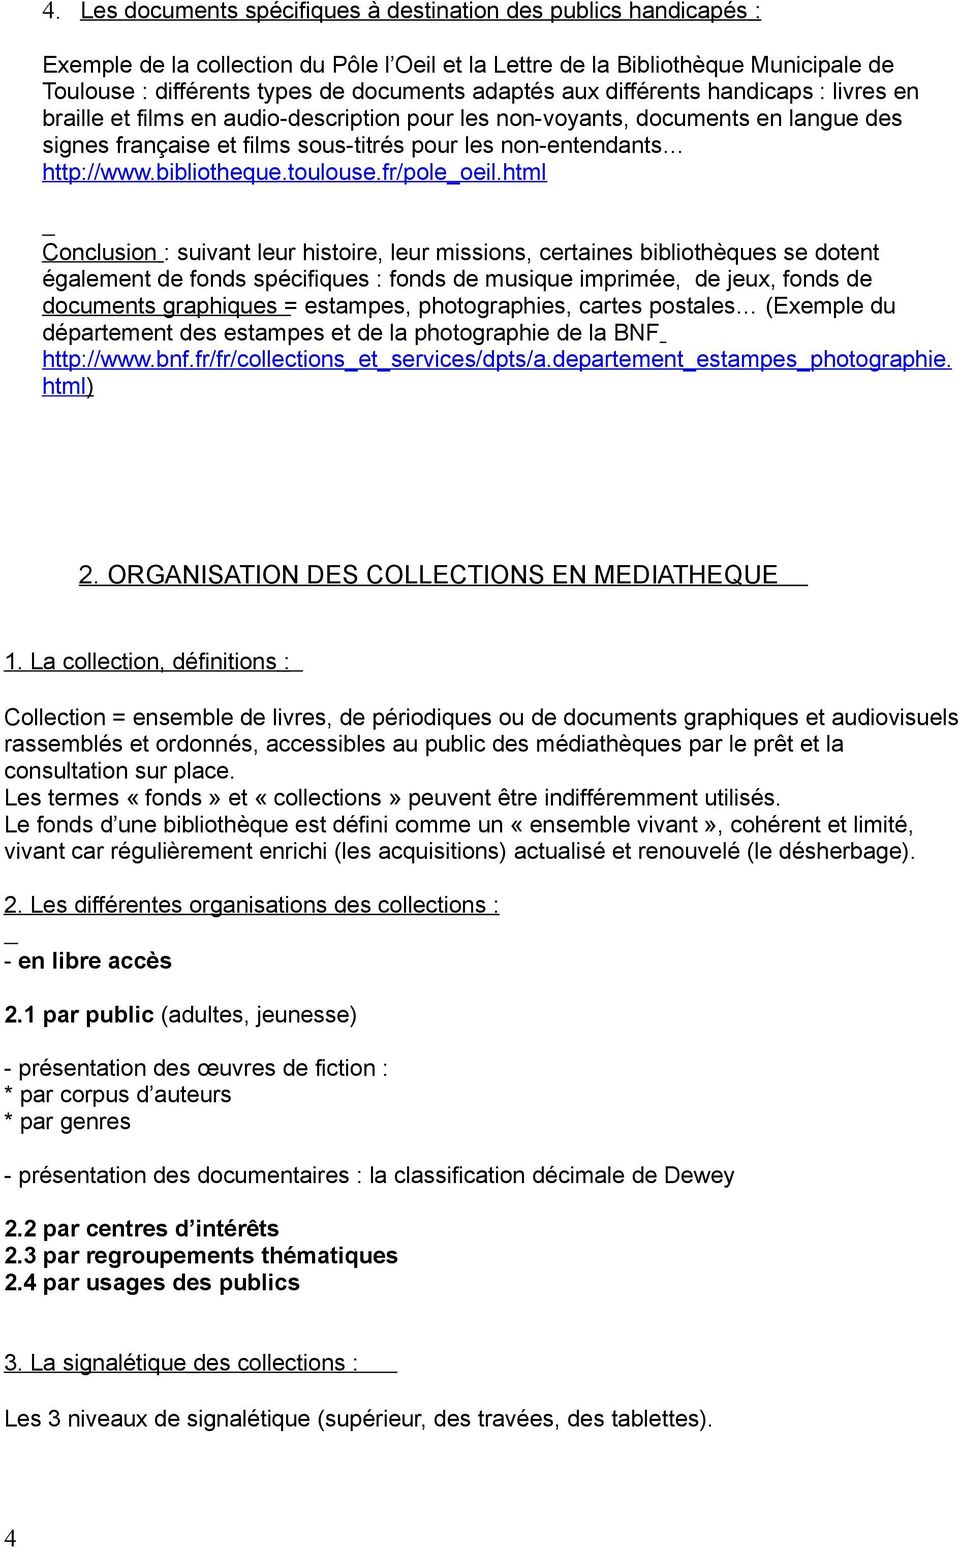 http://www.bibliotheque.toulouse.fr/pole_oeil.